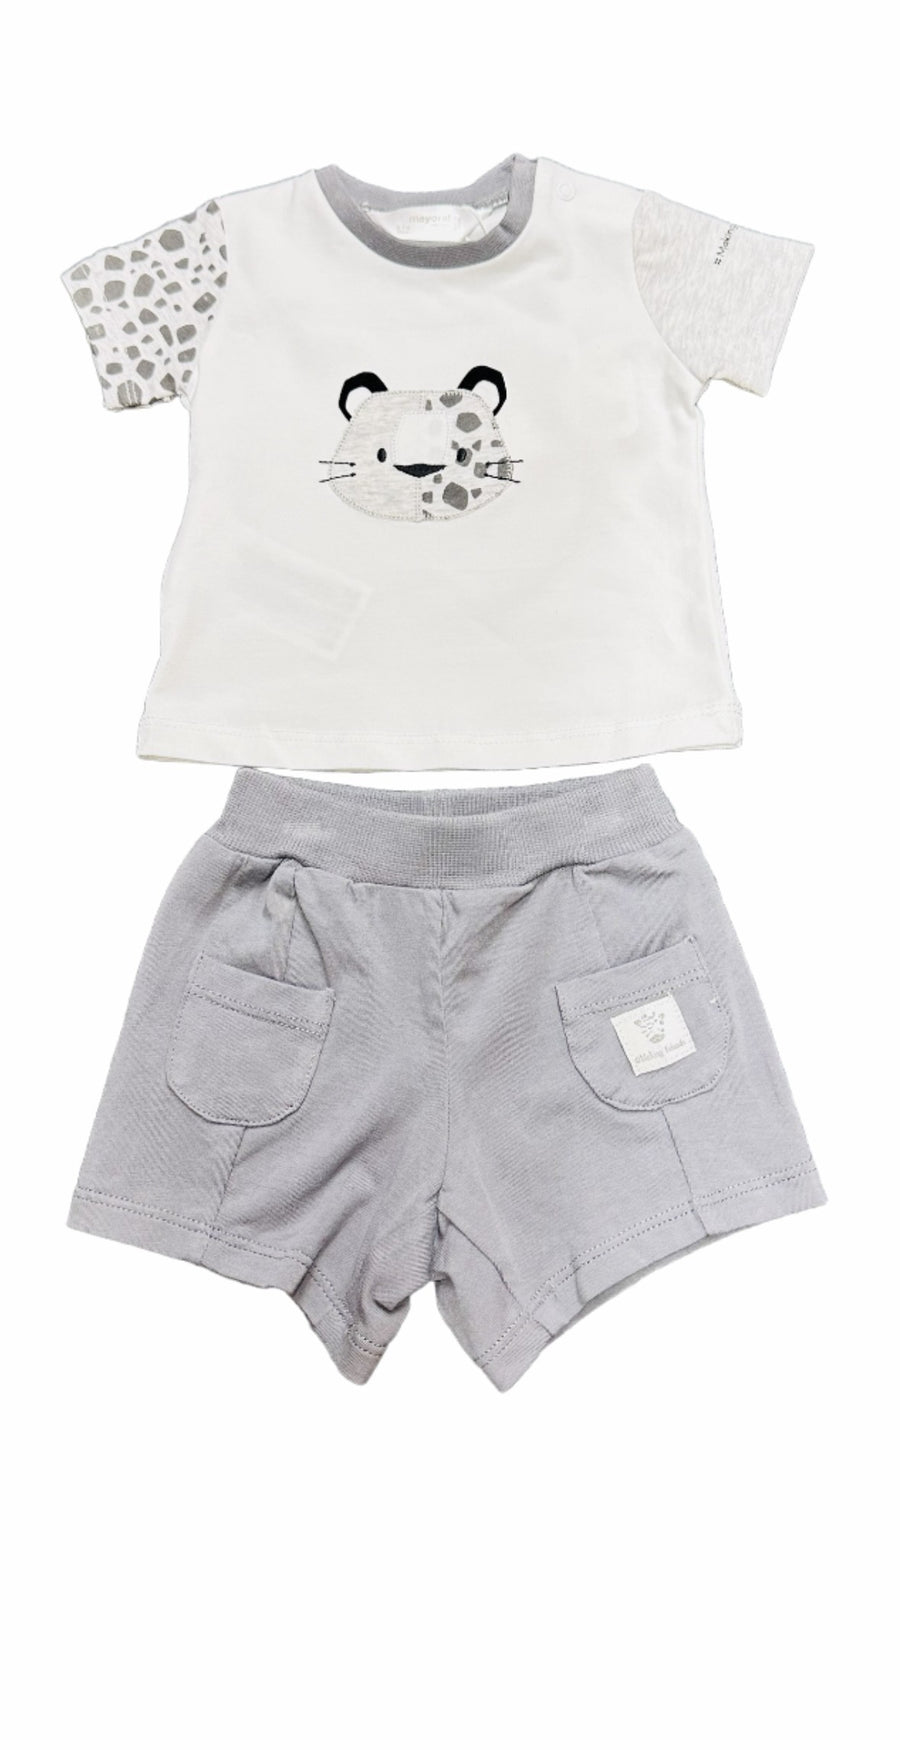 EMBROIDERED TIGER BABY BOY SET - Pink and Brown Boutique